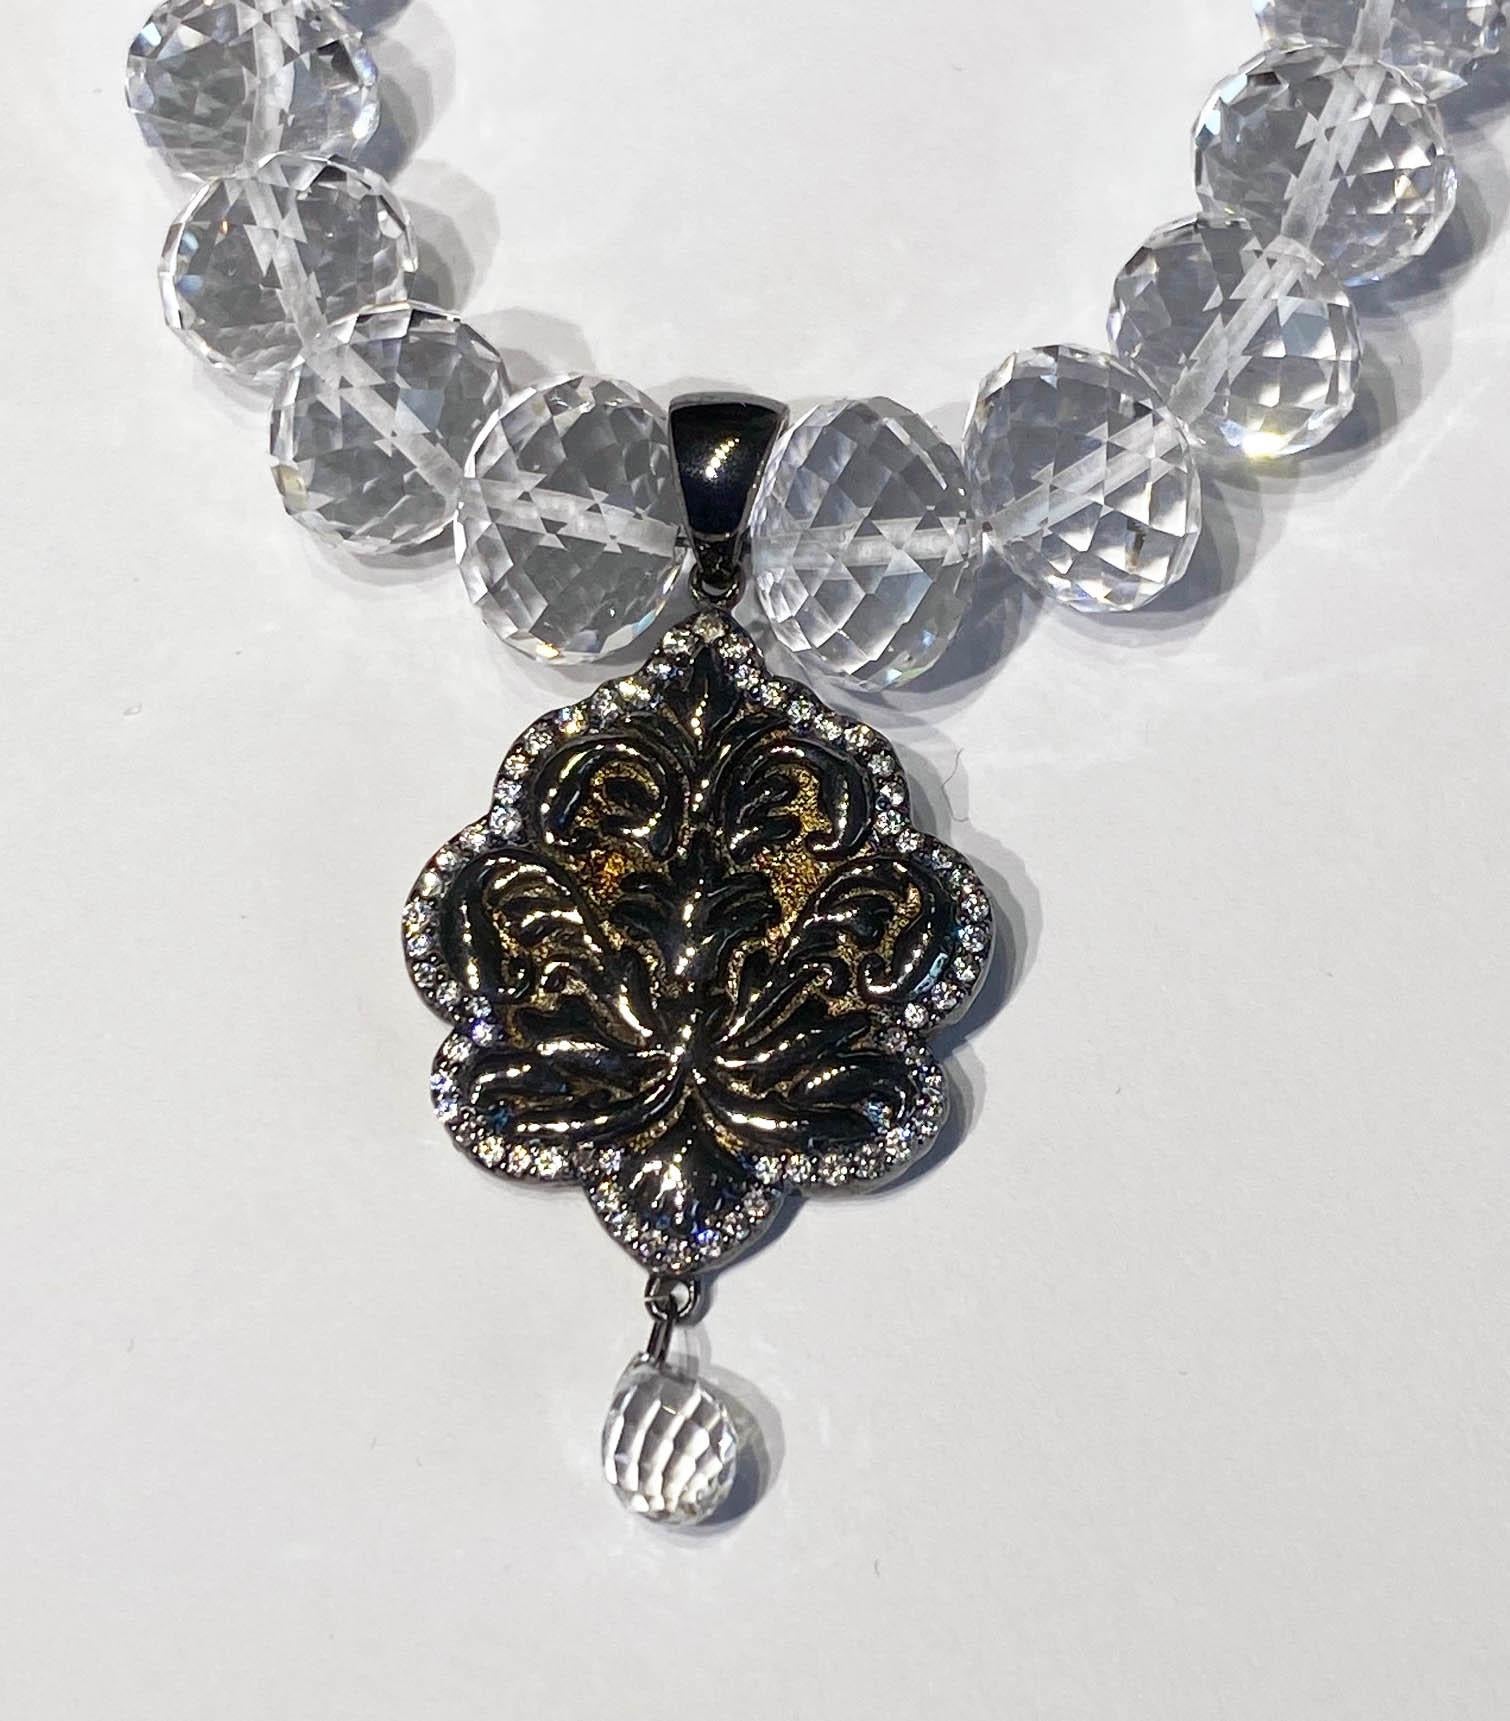 A White Quartz Rondelle Beaded Necklace with a Blackened Silver Pendant set with White Sapphires. The White Quartz Beads graduate in size from 7.5MM to 12MM. The Pendant contains 8.6 Grams of Blackened Silver and is set with 2.4 Carats of White